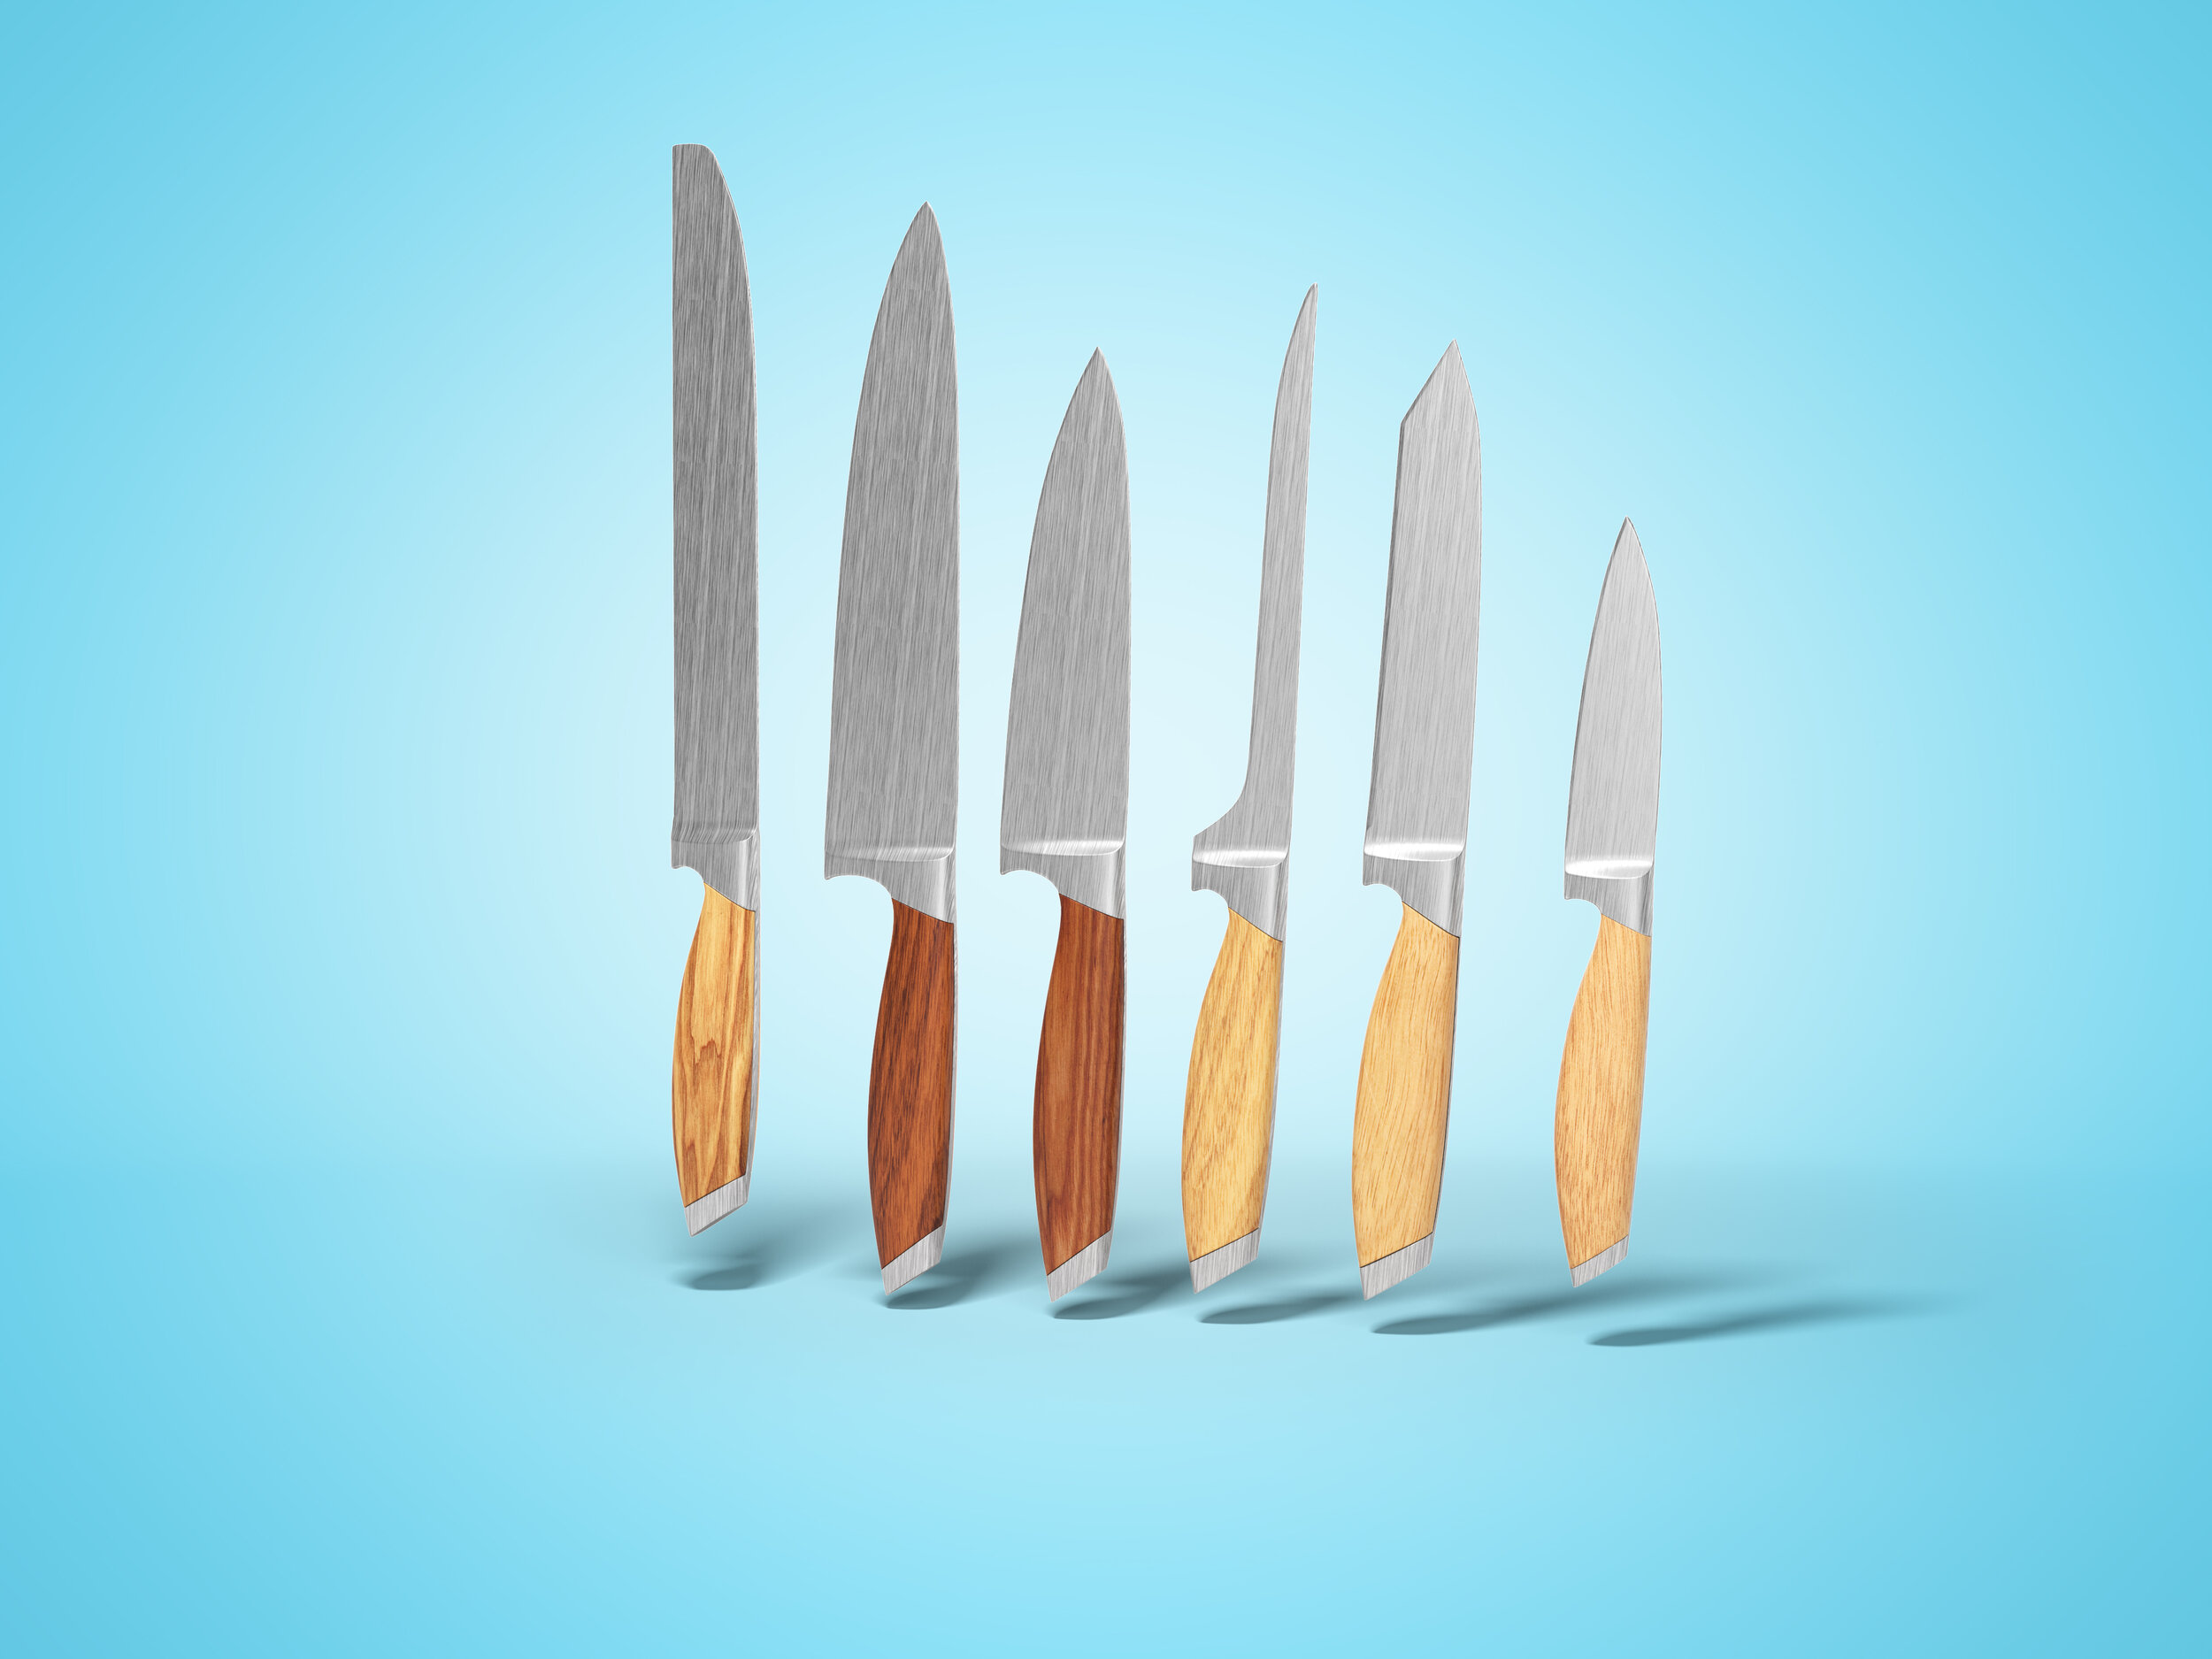 Set-of-metal-knives-with-wooden-handle-isolated-3D-render-on-blue-background-with-shadow-1257959352_4000x3000.jpeg